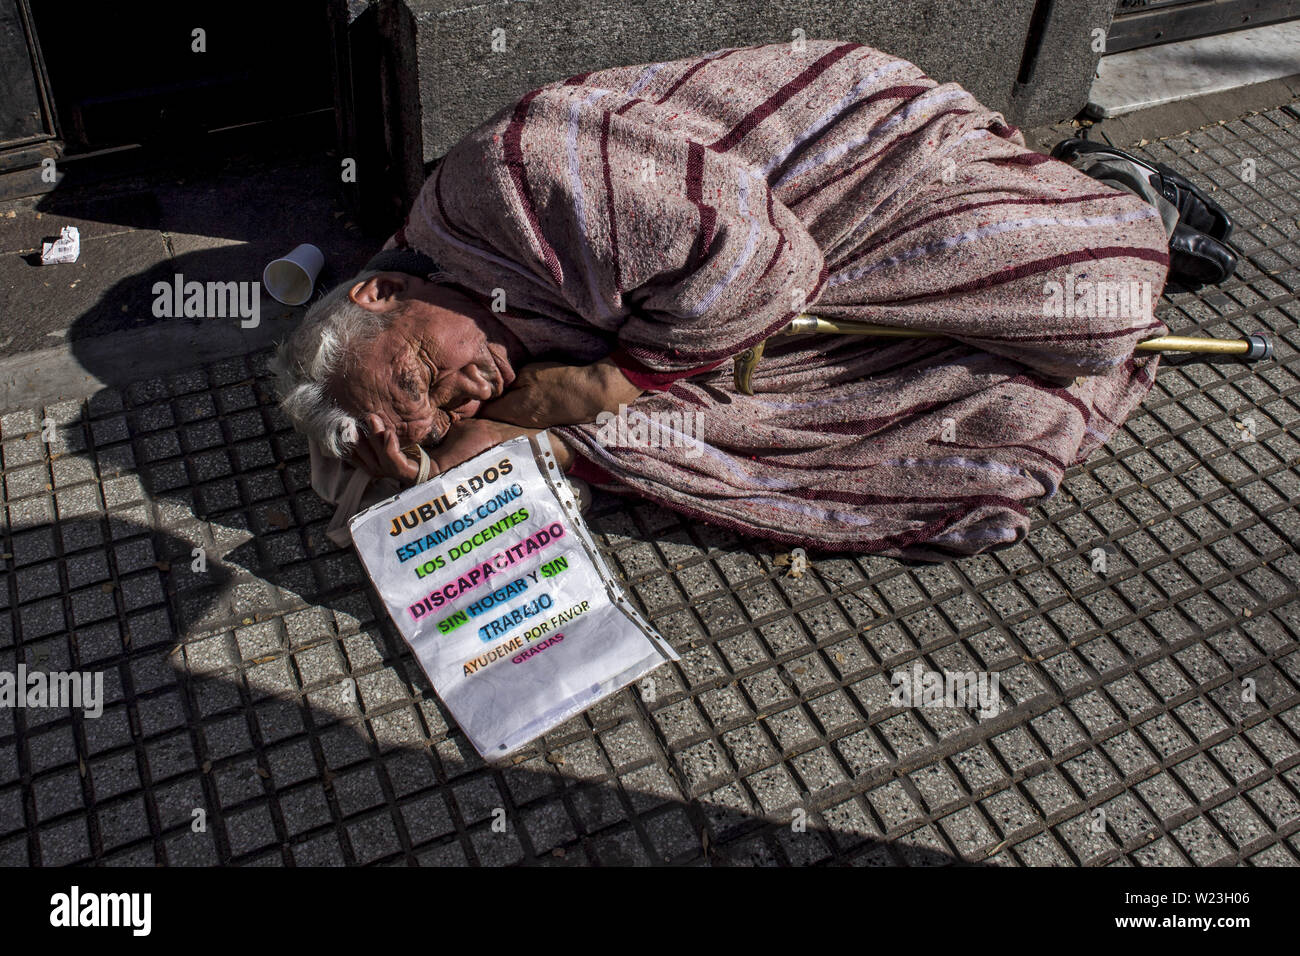 July 4, 2019 - Buenos Aires, Federal Capital, Argetina - Five homeless people have lost their lives due to a cold wave that affects a large part of Argentina with snowfall, freezing wind and temperatures below zero in at least 15 of the country's 24 provinces..The Minister of Human Development and Habitat of the city of Bueno Aires, Guadalupe Tagliaferri, said that 1,146 people live on the streets and more than 40 teams are working on the streets to help people without roofs..The non-governmental organization Red Solidaria announced that five people without roofs have died in two weeks..The Ri Stock Photo